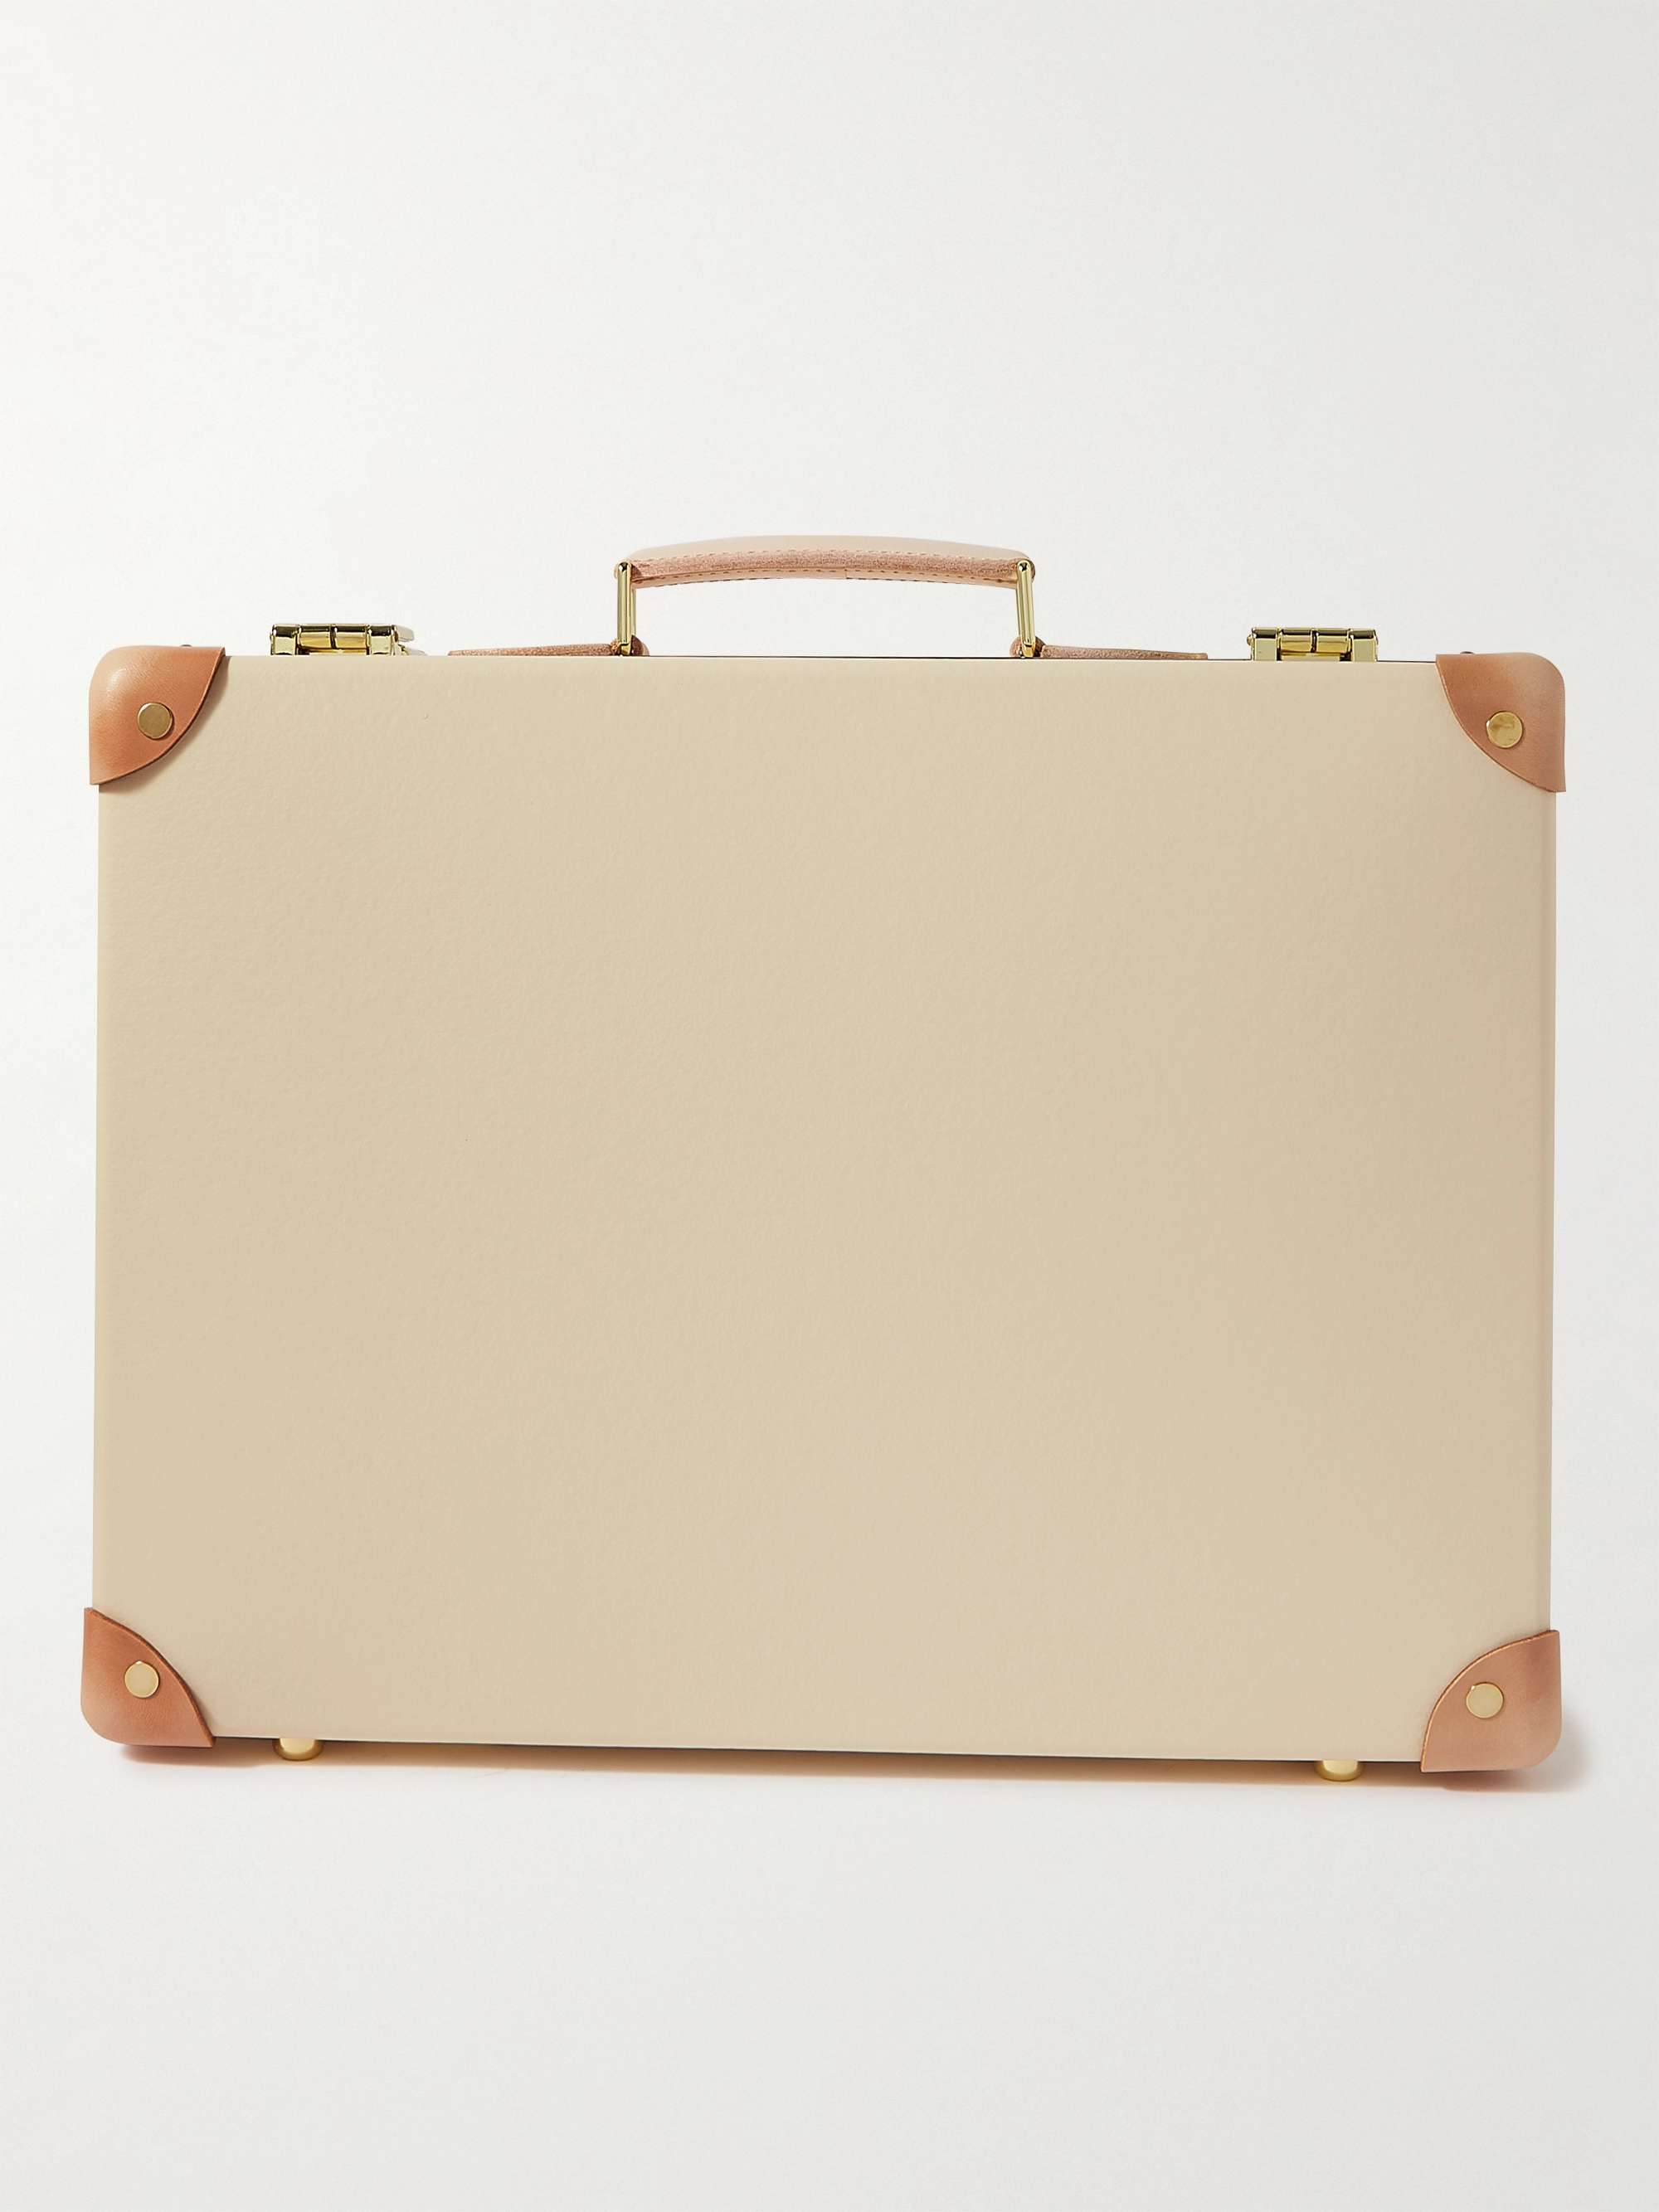 GLOBE-TROTTER Carry-On Leather-Trimmed Attaché Case